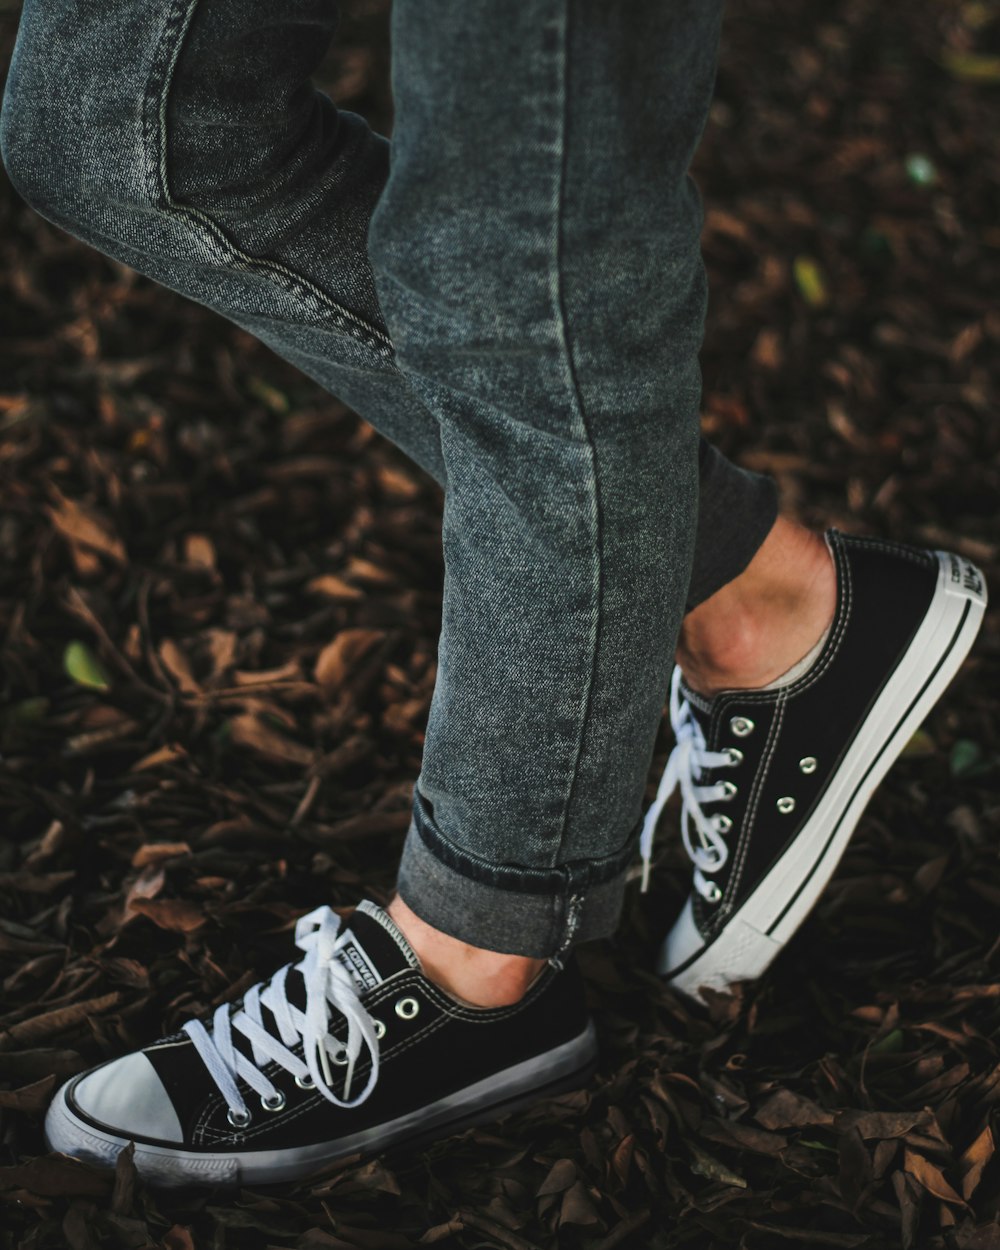 person wearing black-and-white Converse All-Star sneakers photo – Free Grey  Image on Unsplash